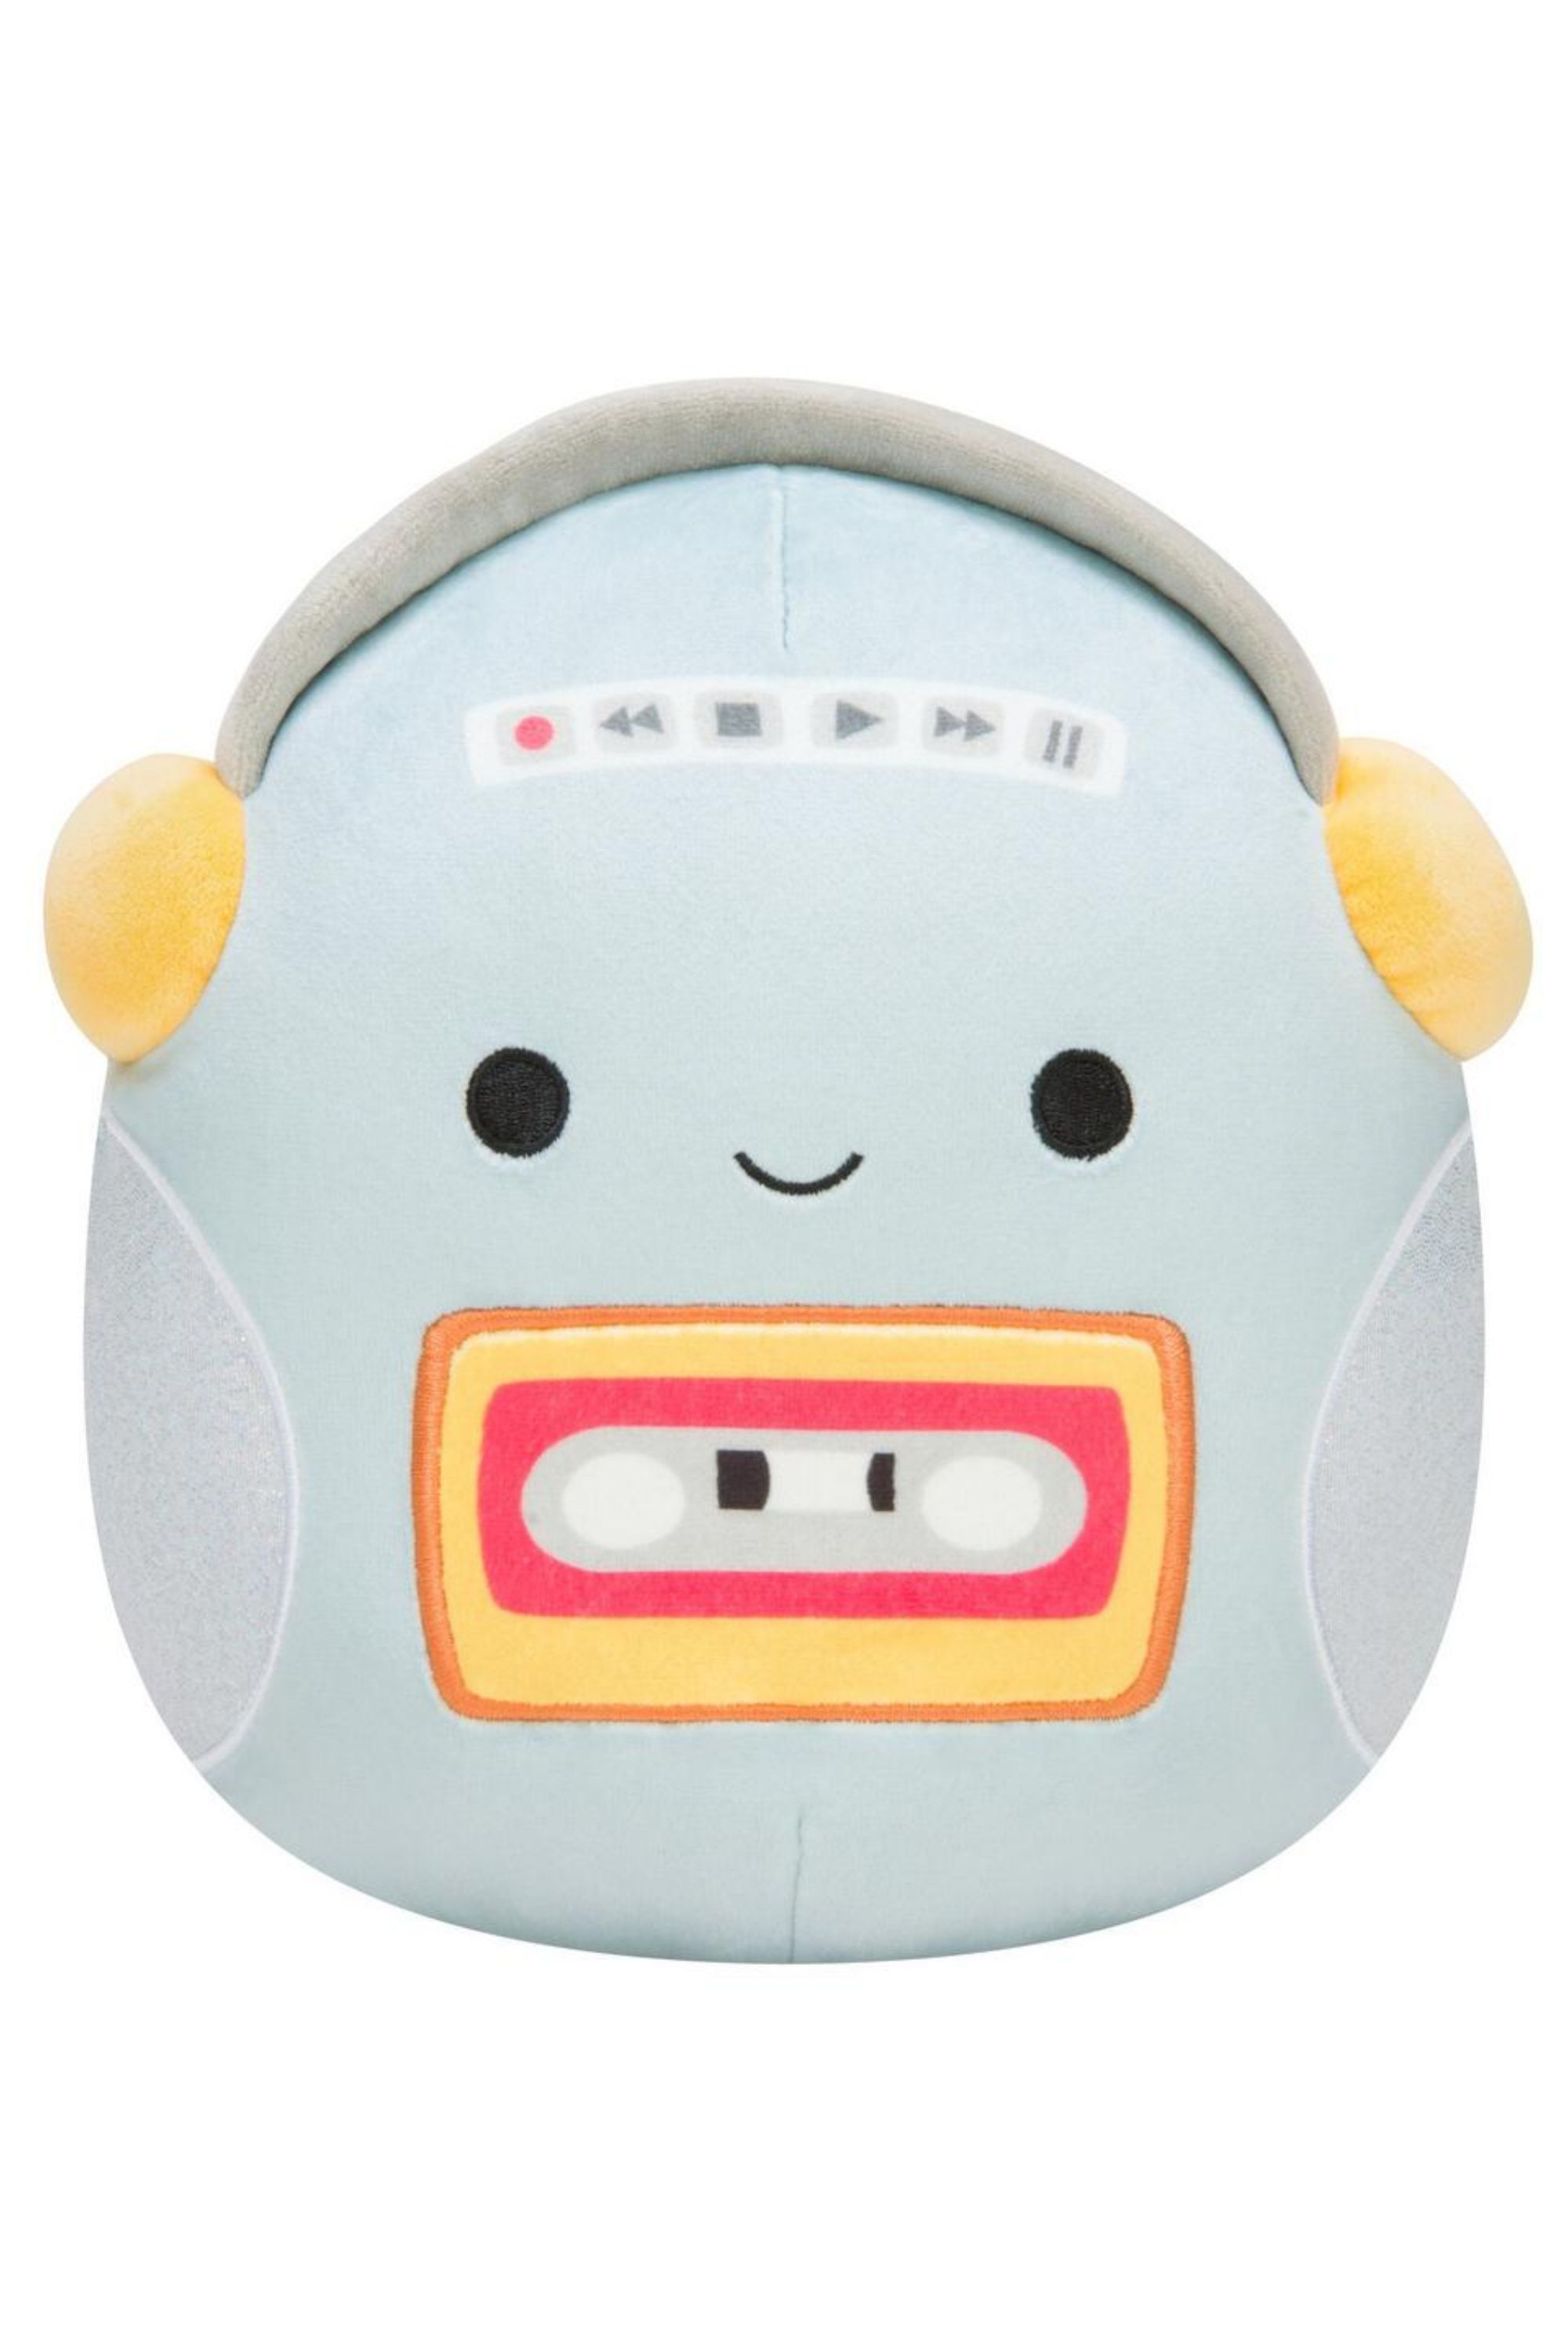 Casja The Cassette Player Squishmallow